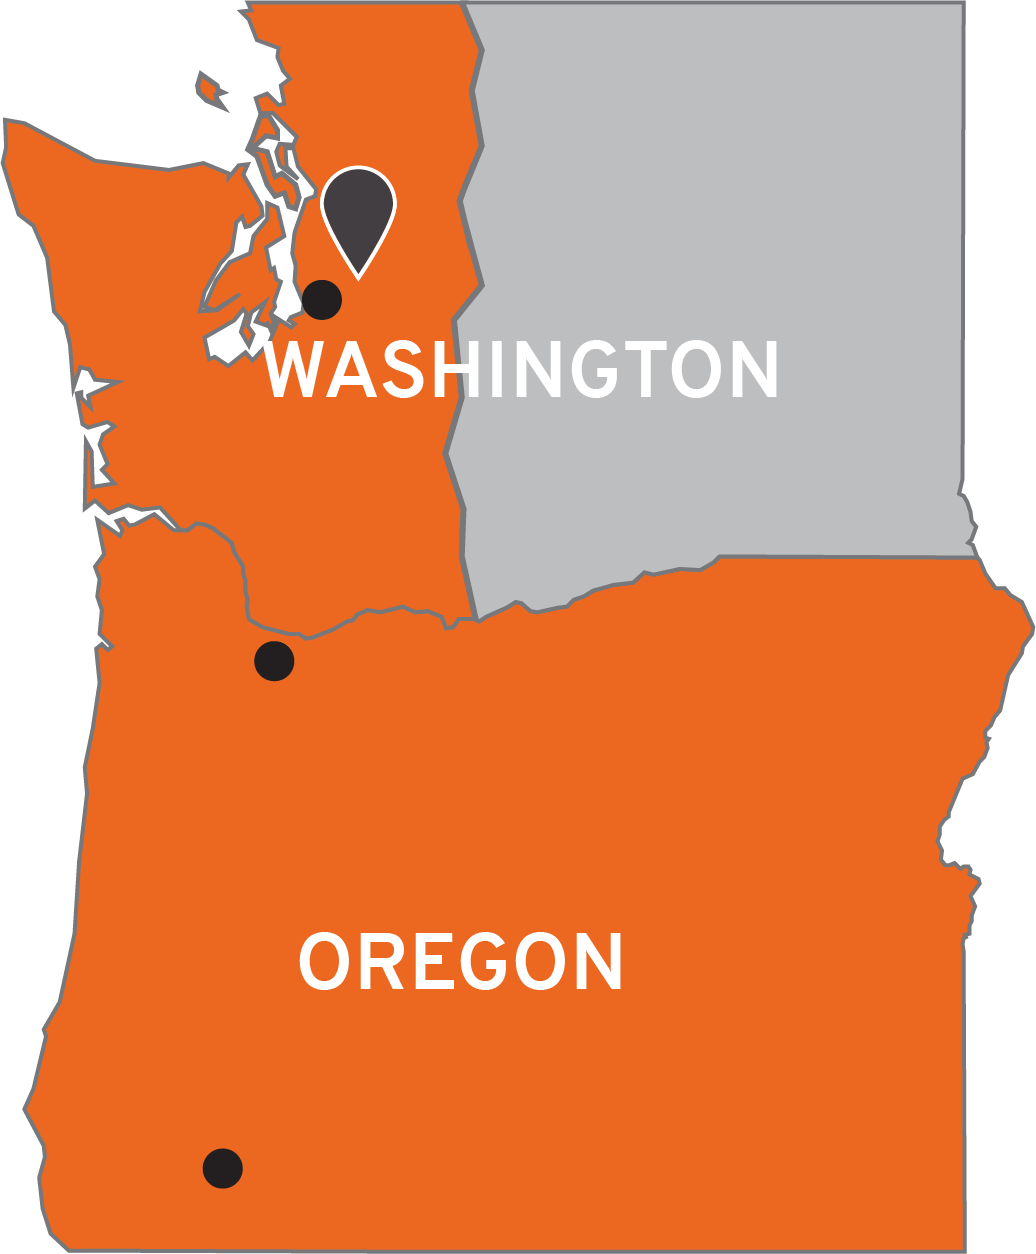 Map of Washington and Oregon with Toyota Lift Northwest's Territory in Orange and 4 locations marked